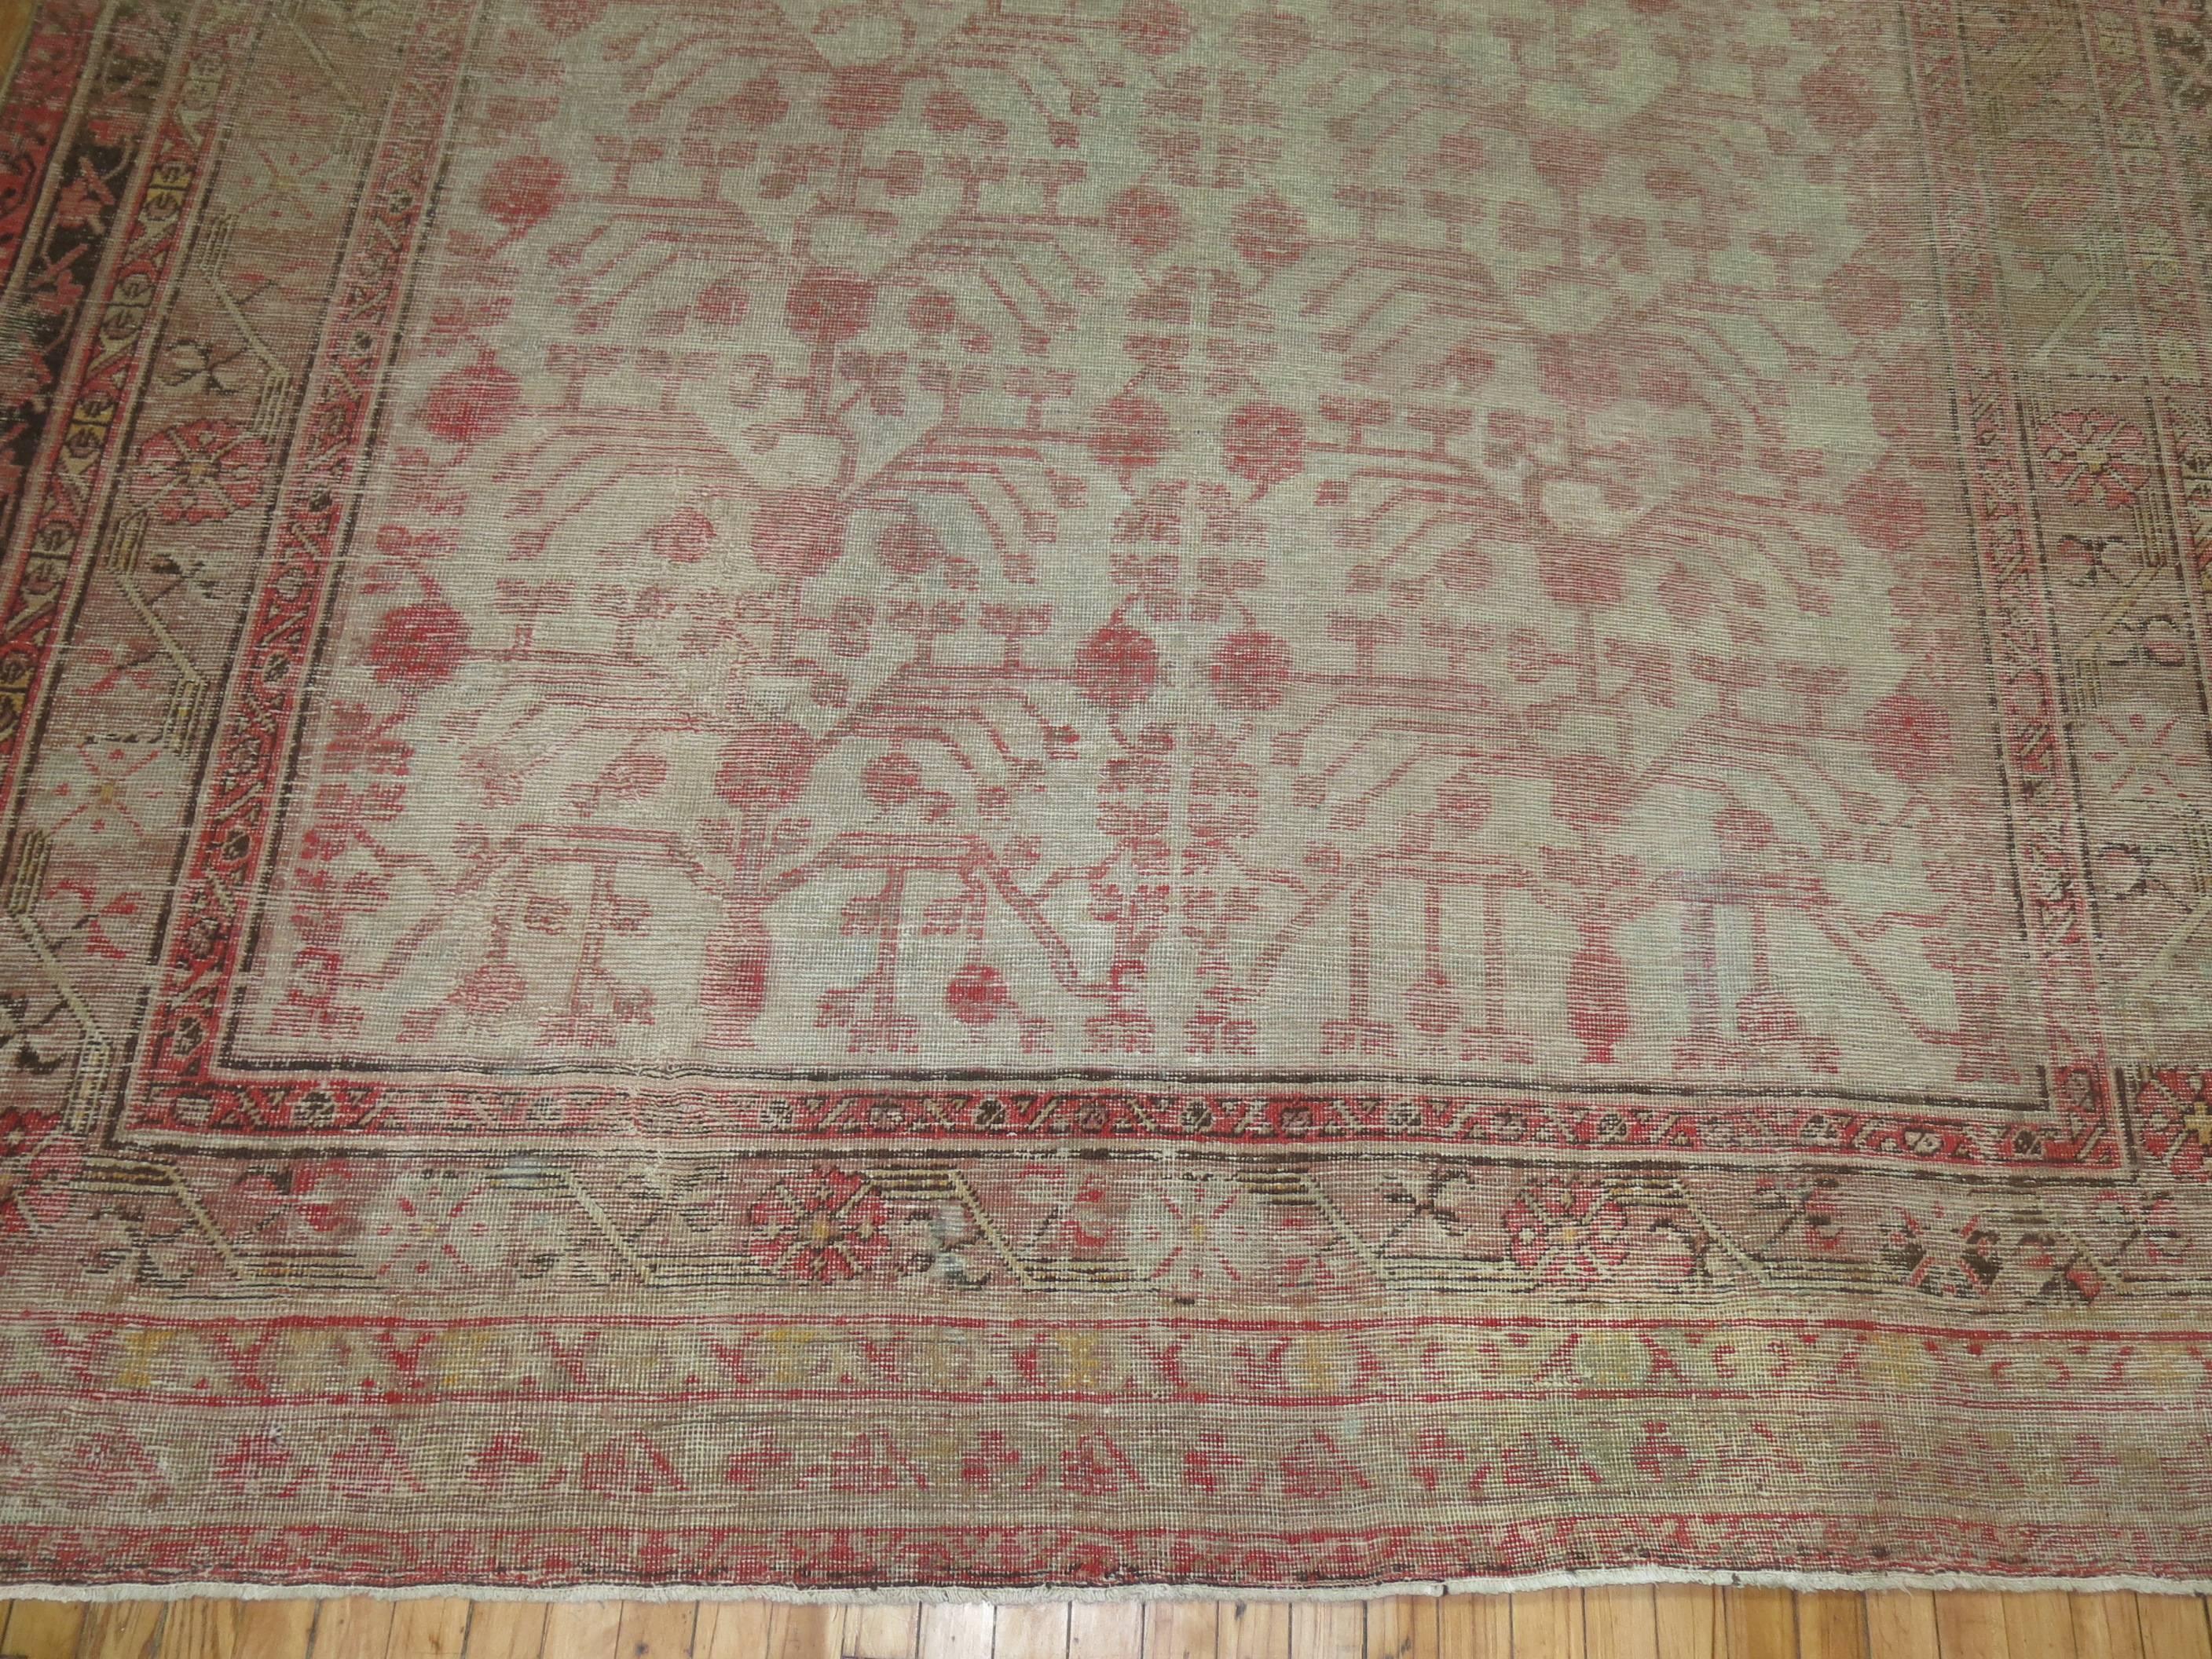 Pomegranate Khotan Shabby Chic Late 19th Century Large Gallery Size Rug For Sale 3